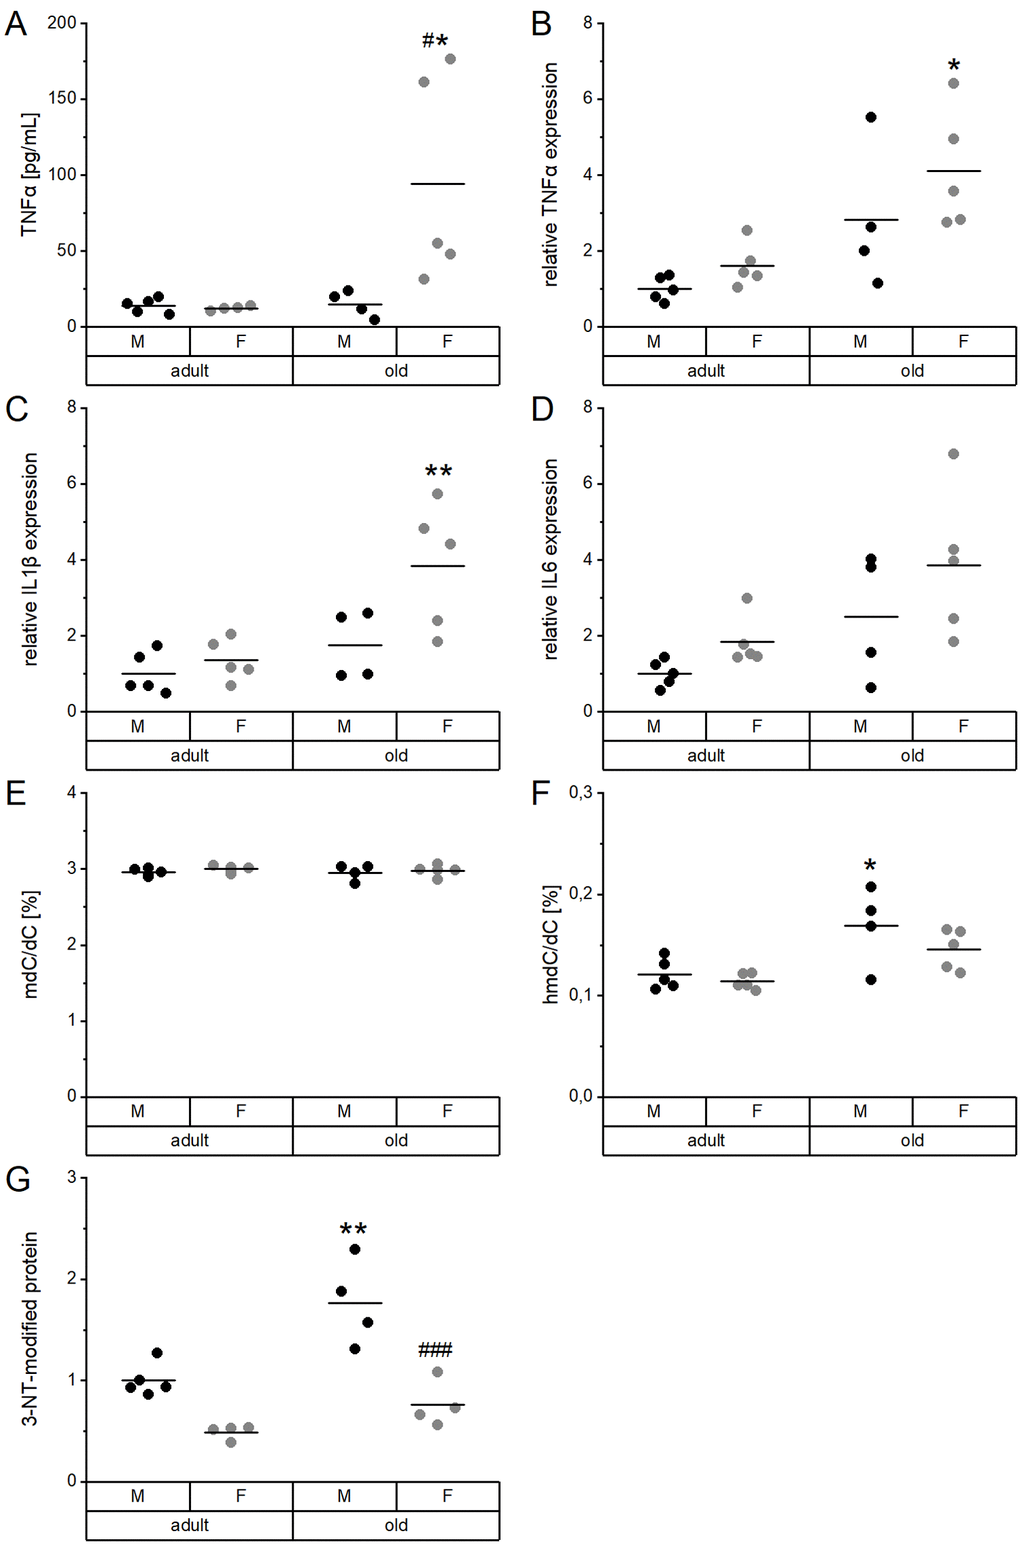 Proinflammatory cytokines and DNA and protein modifications in relation to age and sex. Serum (A) and liver extracts (B–G) of adult (24 weeks) and old (109-114 weeks) male and female mice (n = 4-5) fed with a chow diet ad libitum were subjected to enzyme-linked immunosorbent assay (A), qRT-PCR analysis (B–D), tandem mass spectrometry (E, F), and immunoblotting (G). This way, proinflammatory cytokines (A–D), global DNA methylation (mdC/dC; E), and hydroxymethylation (hmdC/dC; F), as well as 3-nitrotyrosine (3-NT, G) protein modifications were determined. Hepatic transcription levels (B–D) were normalized by a composite factor based on the house-keeping genes Hprt and Rpl13a, whereas 3-NT-modified proteins were normalized to GAPDH (G). Except for (E) and (F), where data is given in %, data is presented as fold change compared to male adults (A–D, G). Statistical testing based on Two-Way ANOVA and post hoc analysis using Bonferroni’s test with * p # p ### p 